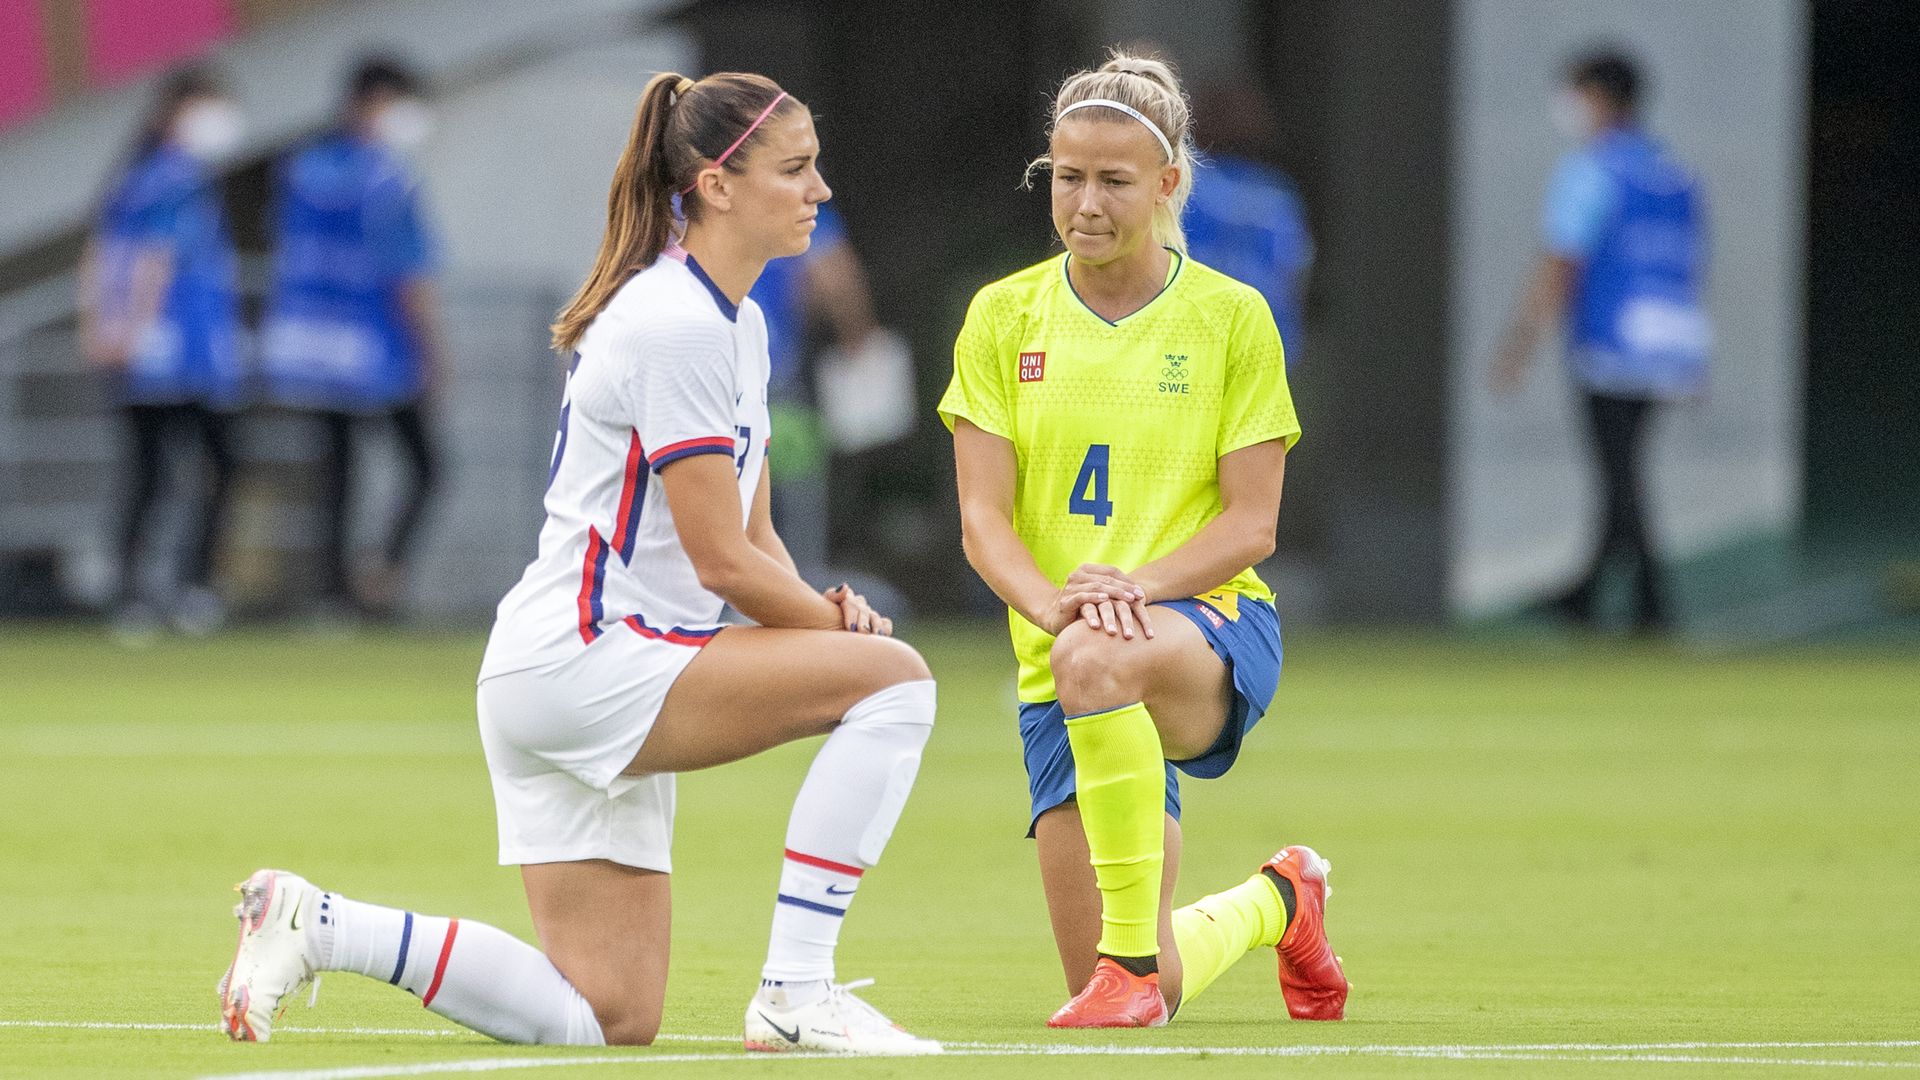 The U.S. and Swedish women's soccer teams took a knee ahead of their match Wednesday to protest racism and discrimination.